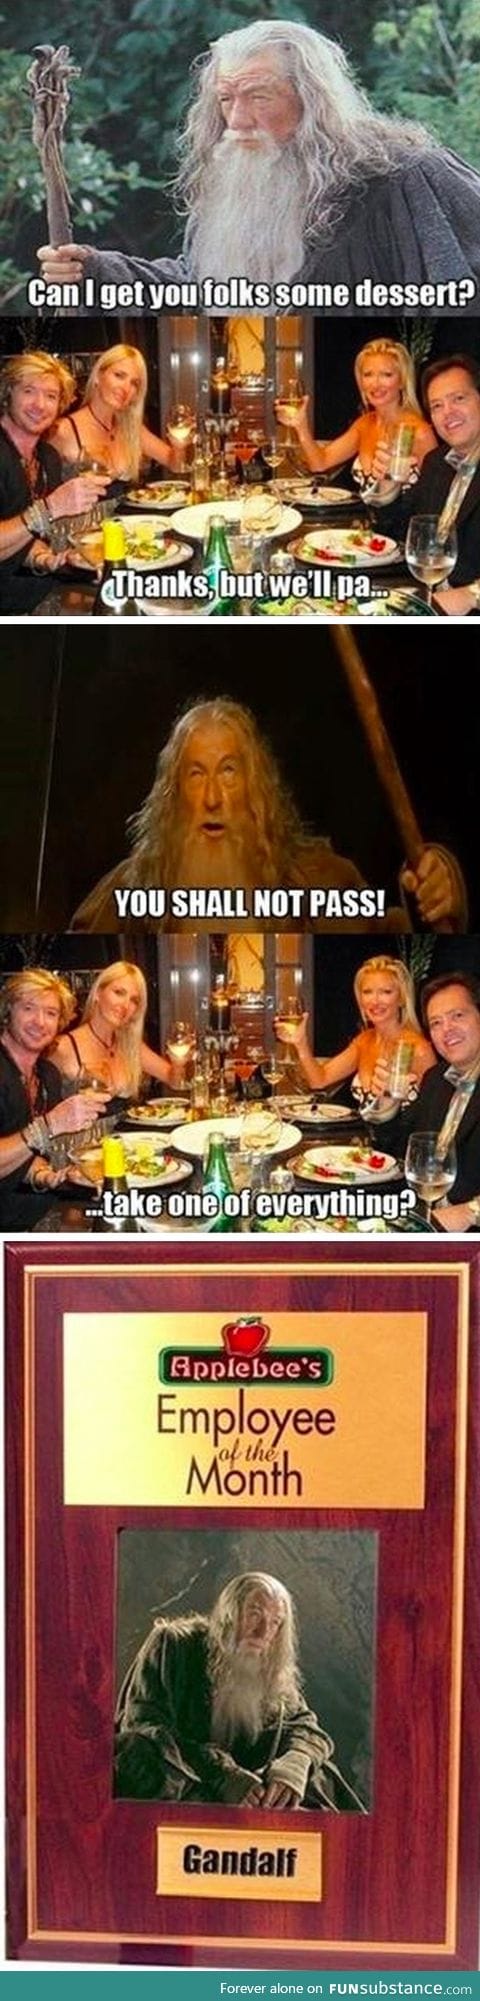 Gandalf, employee of the month